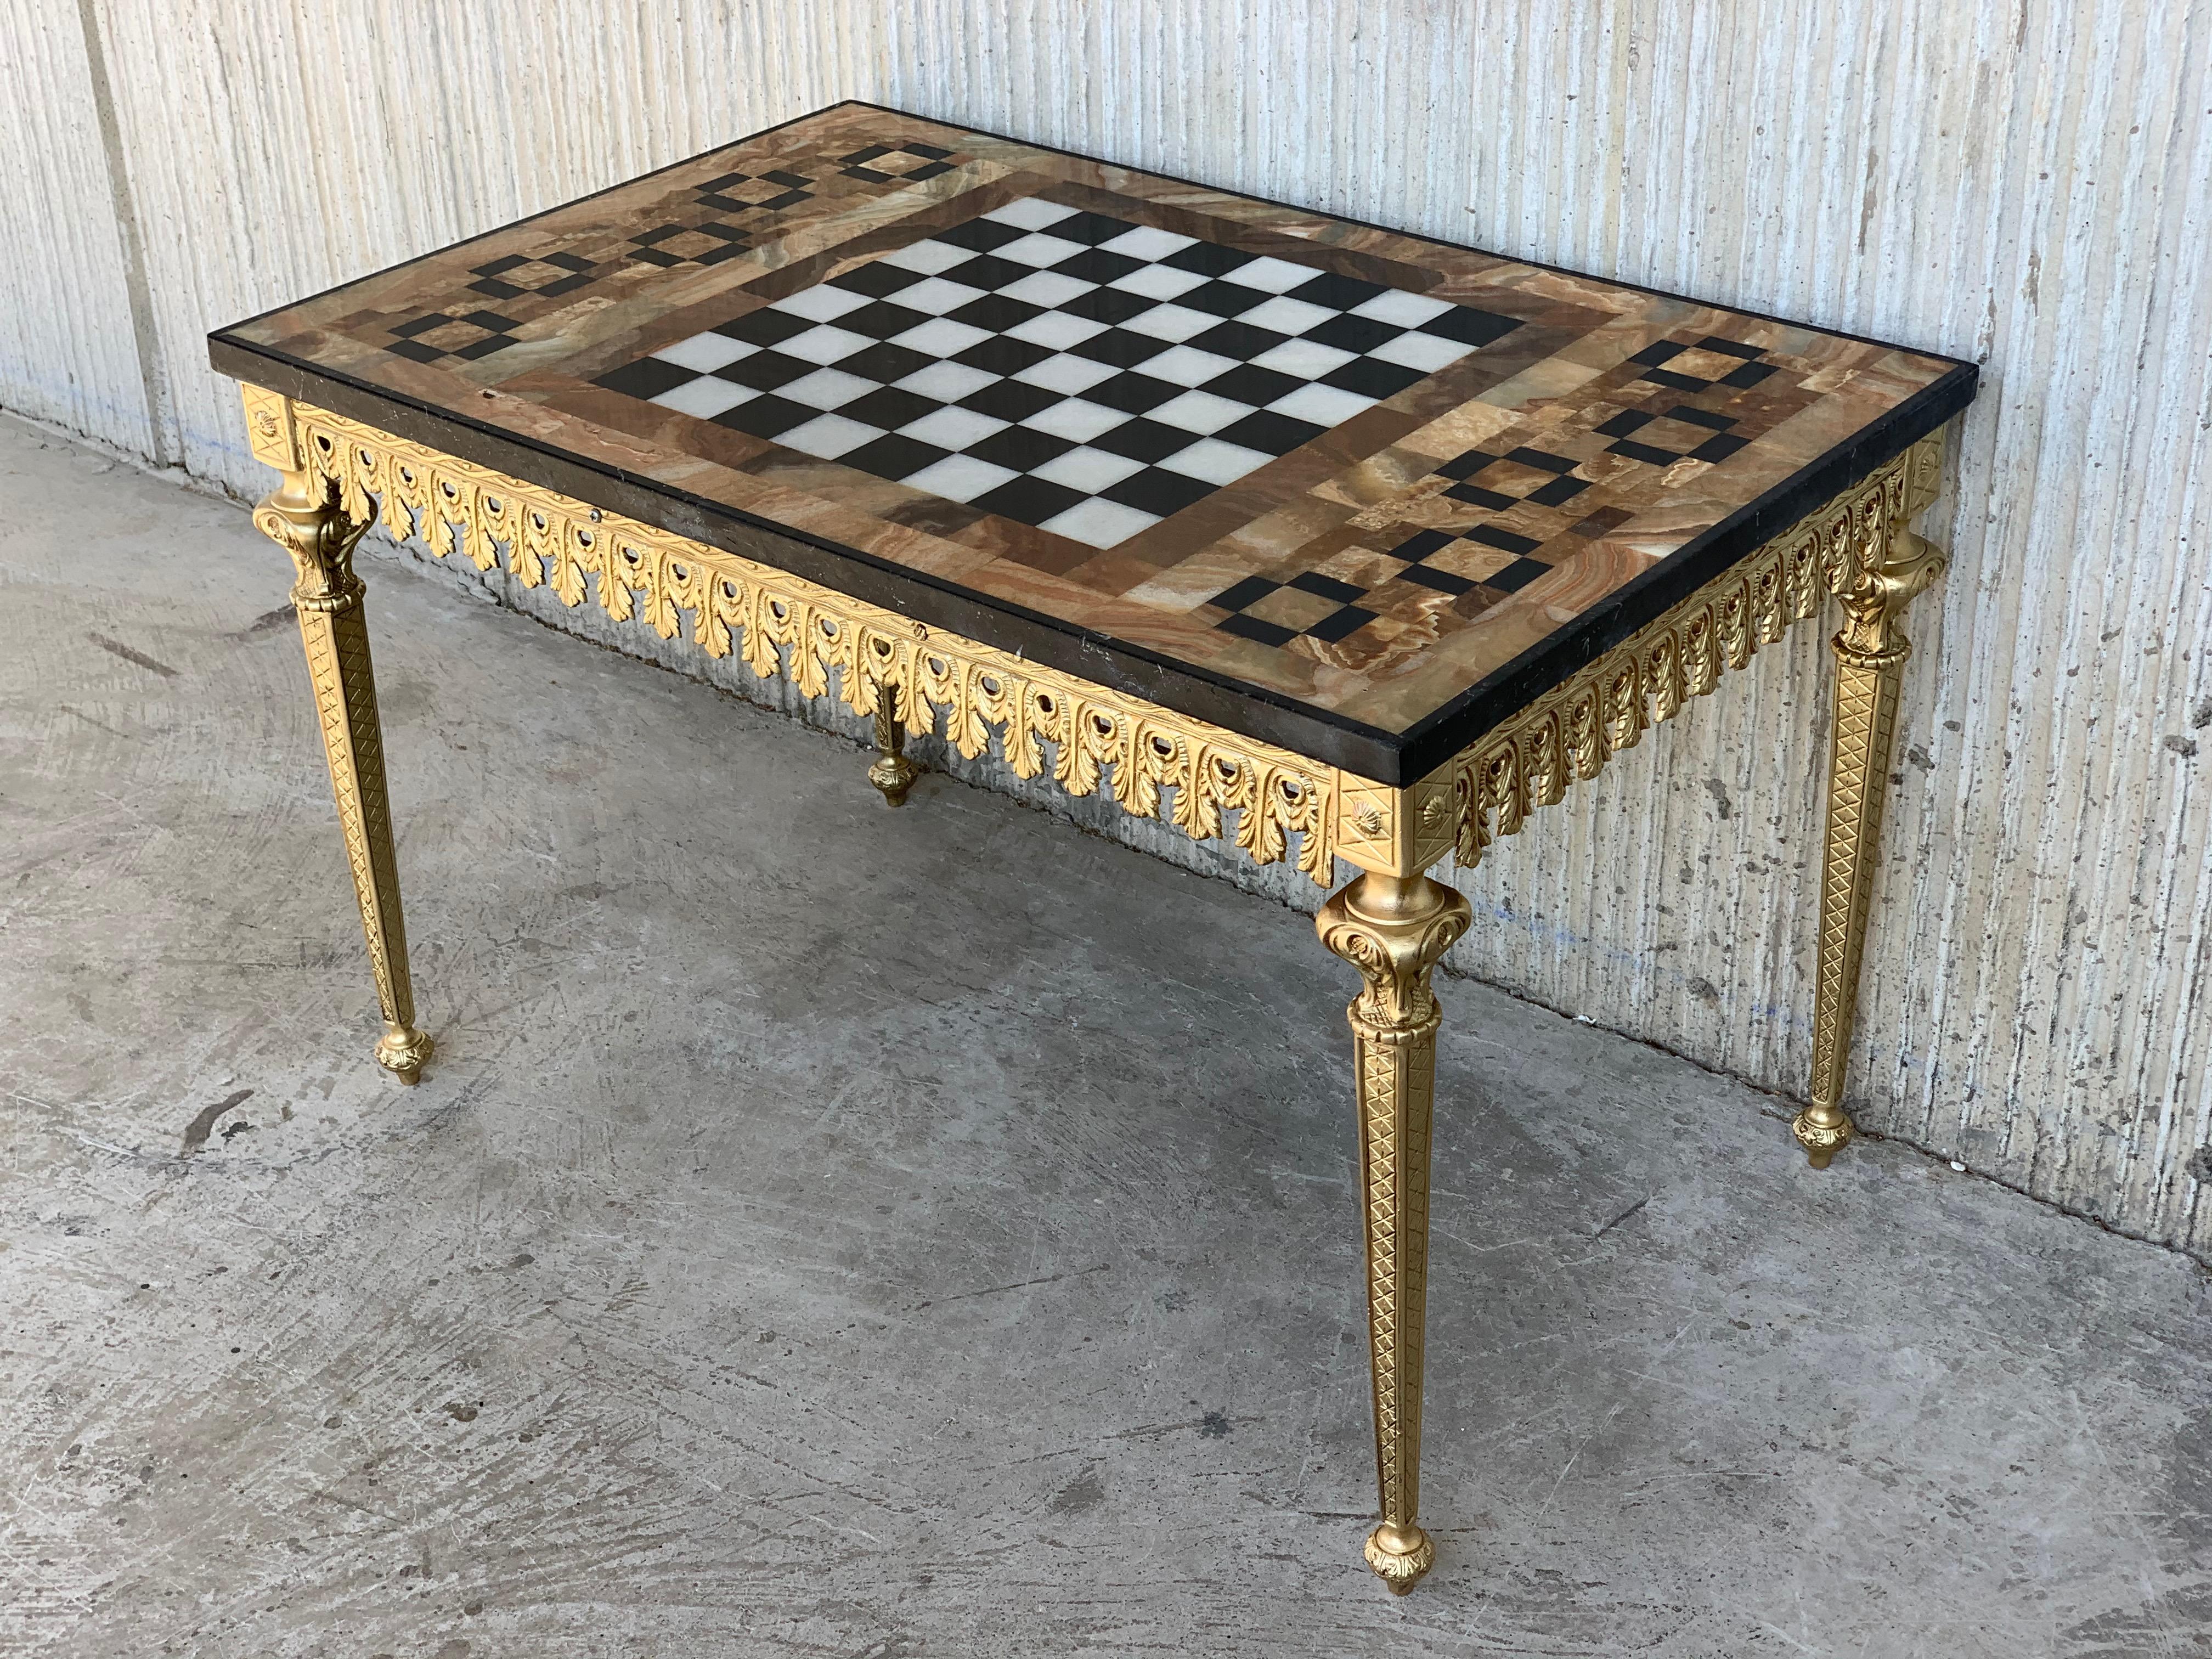 French 20th Century Ormolu Mounted Bronze Game of Chess with Marble and Onix Top Table